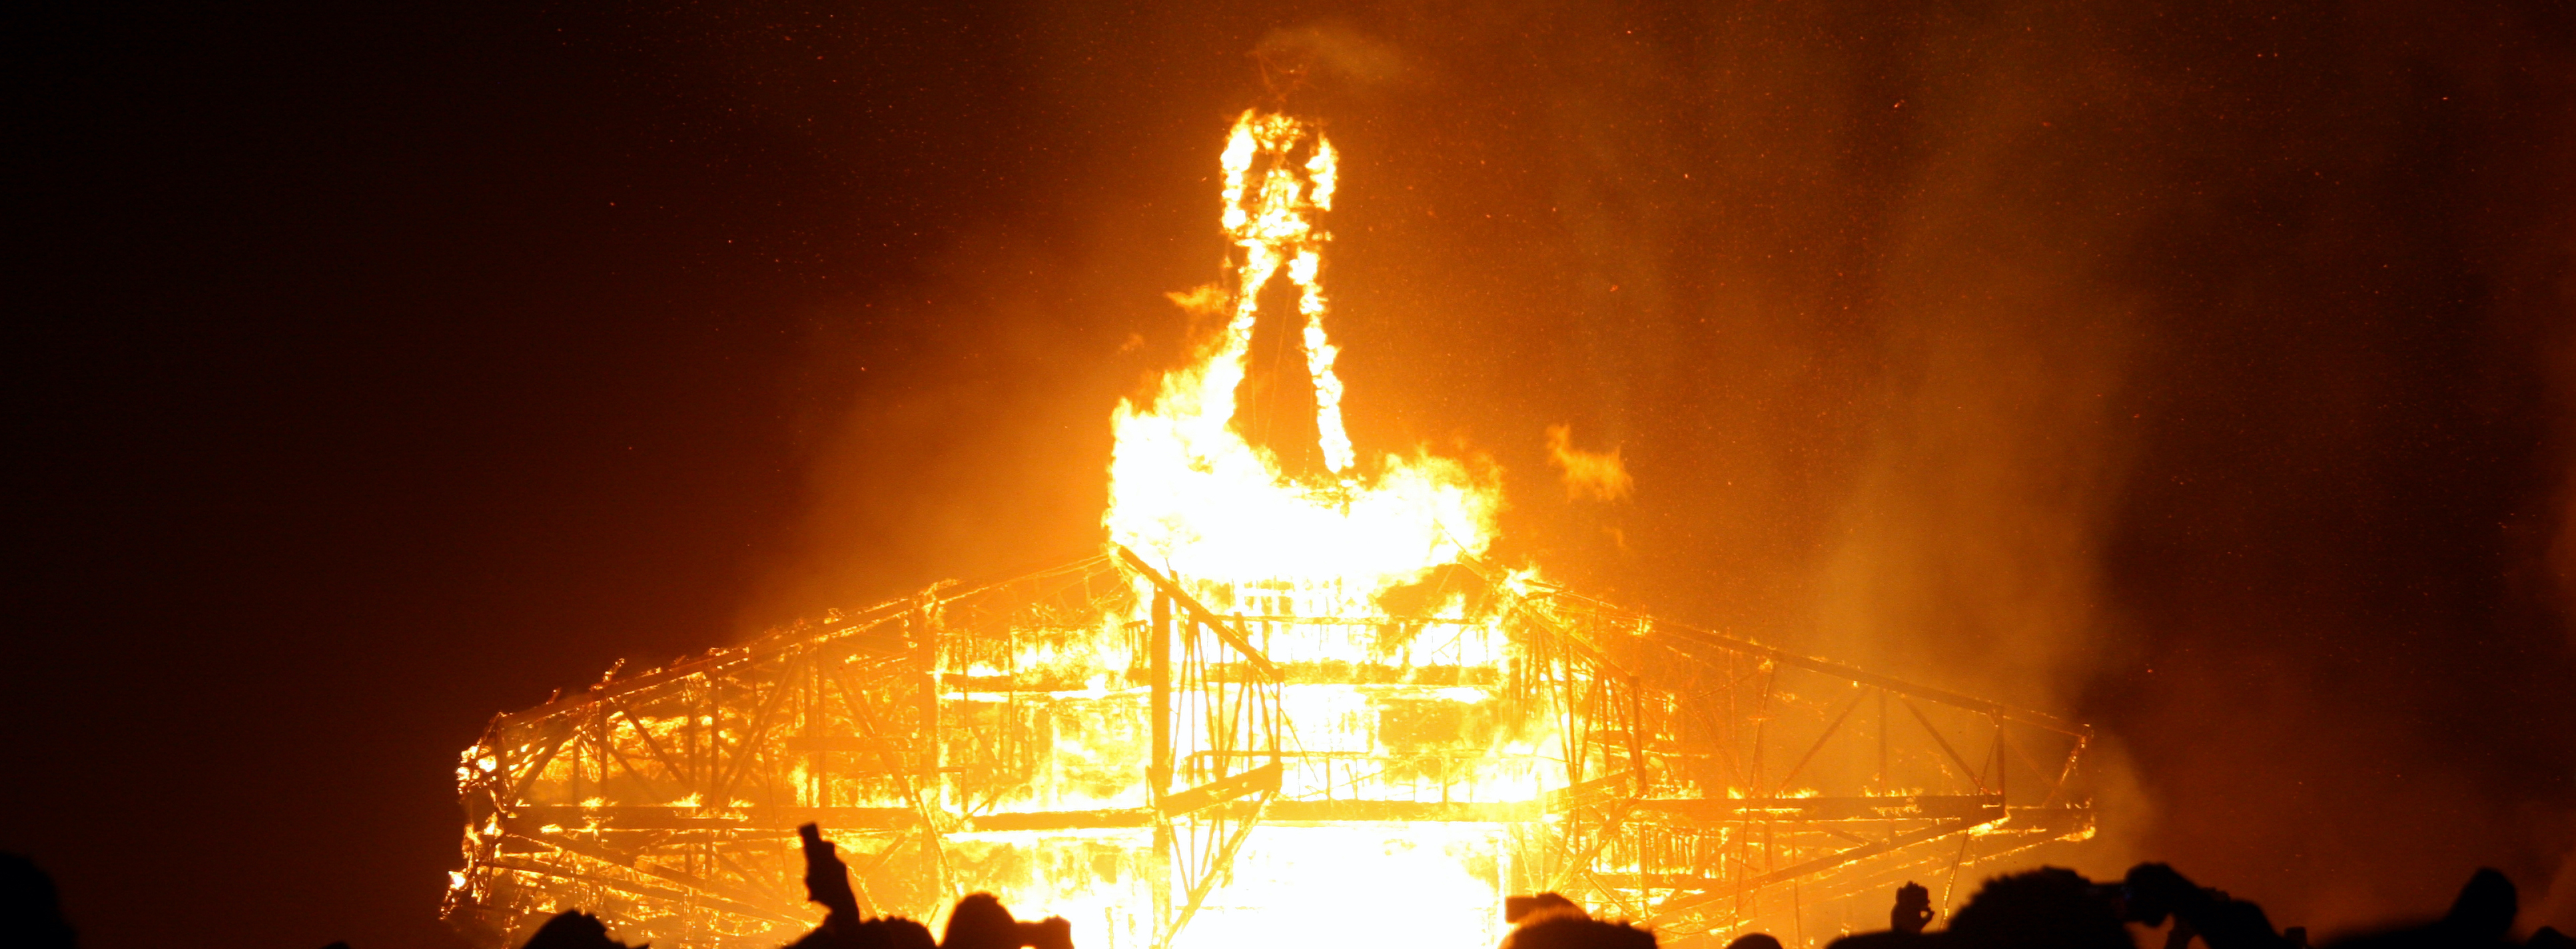 Burning Man festival sues Department of Interior over release of financial records